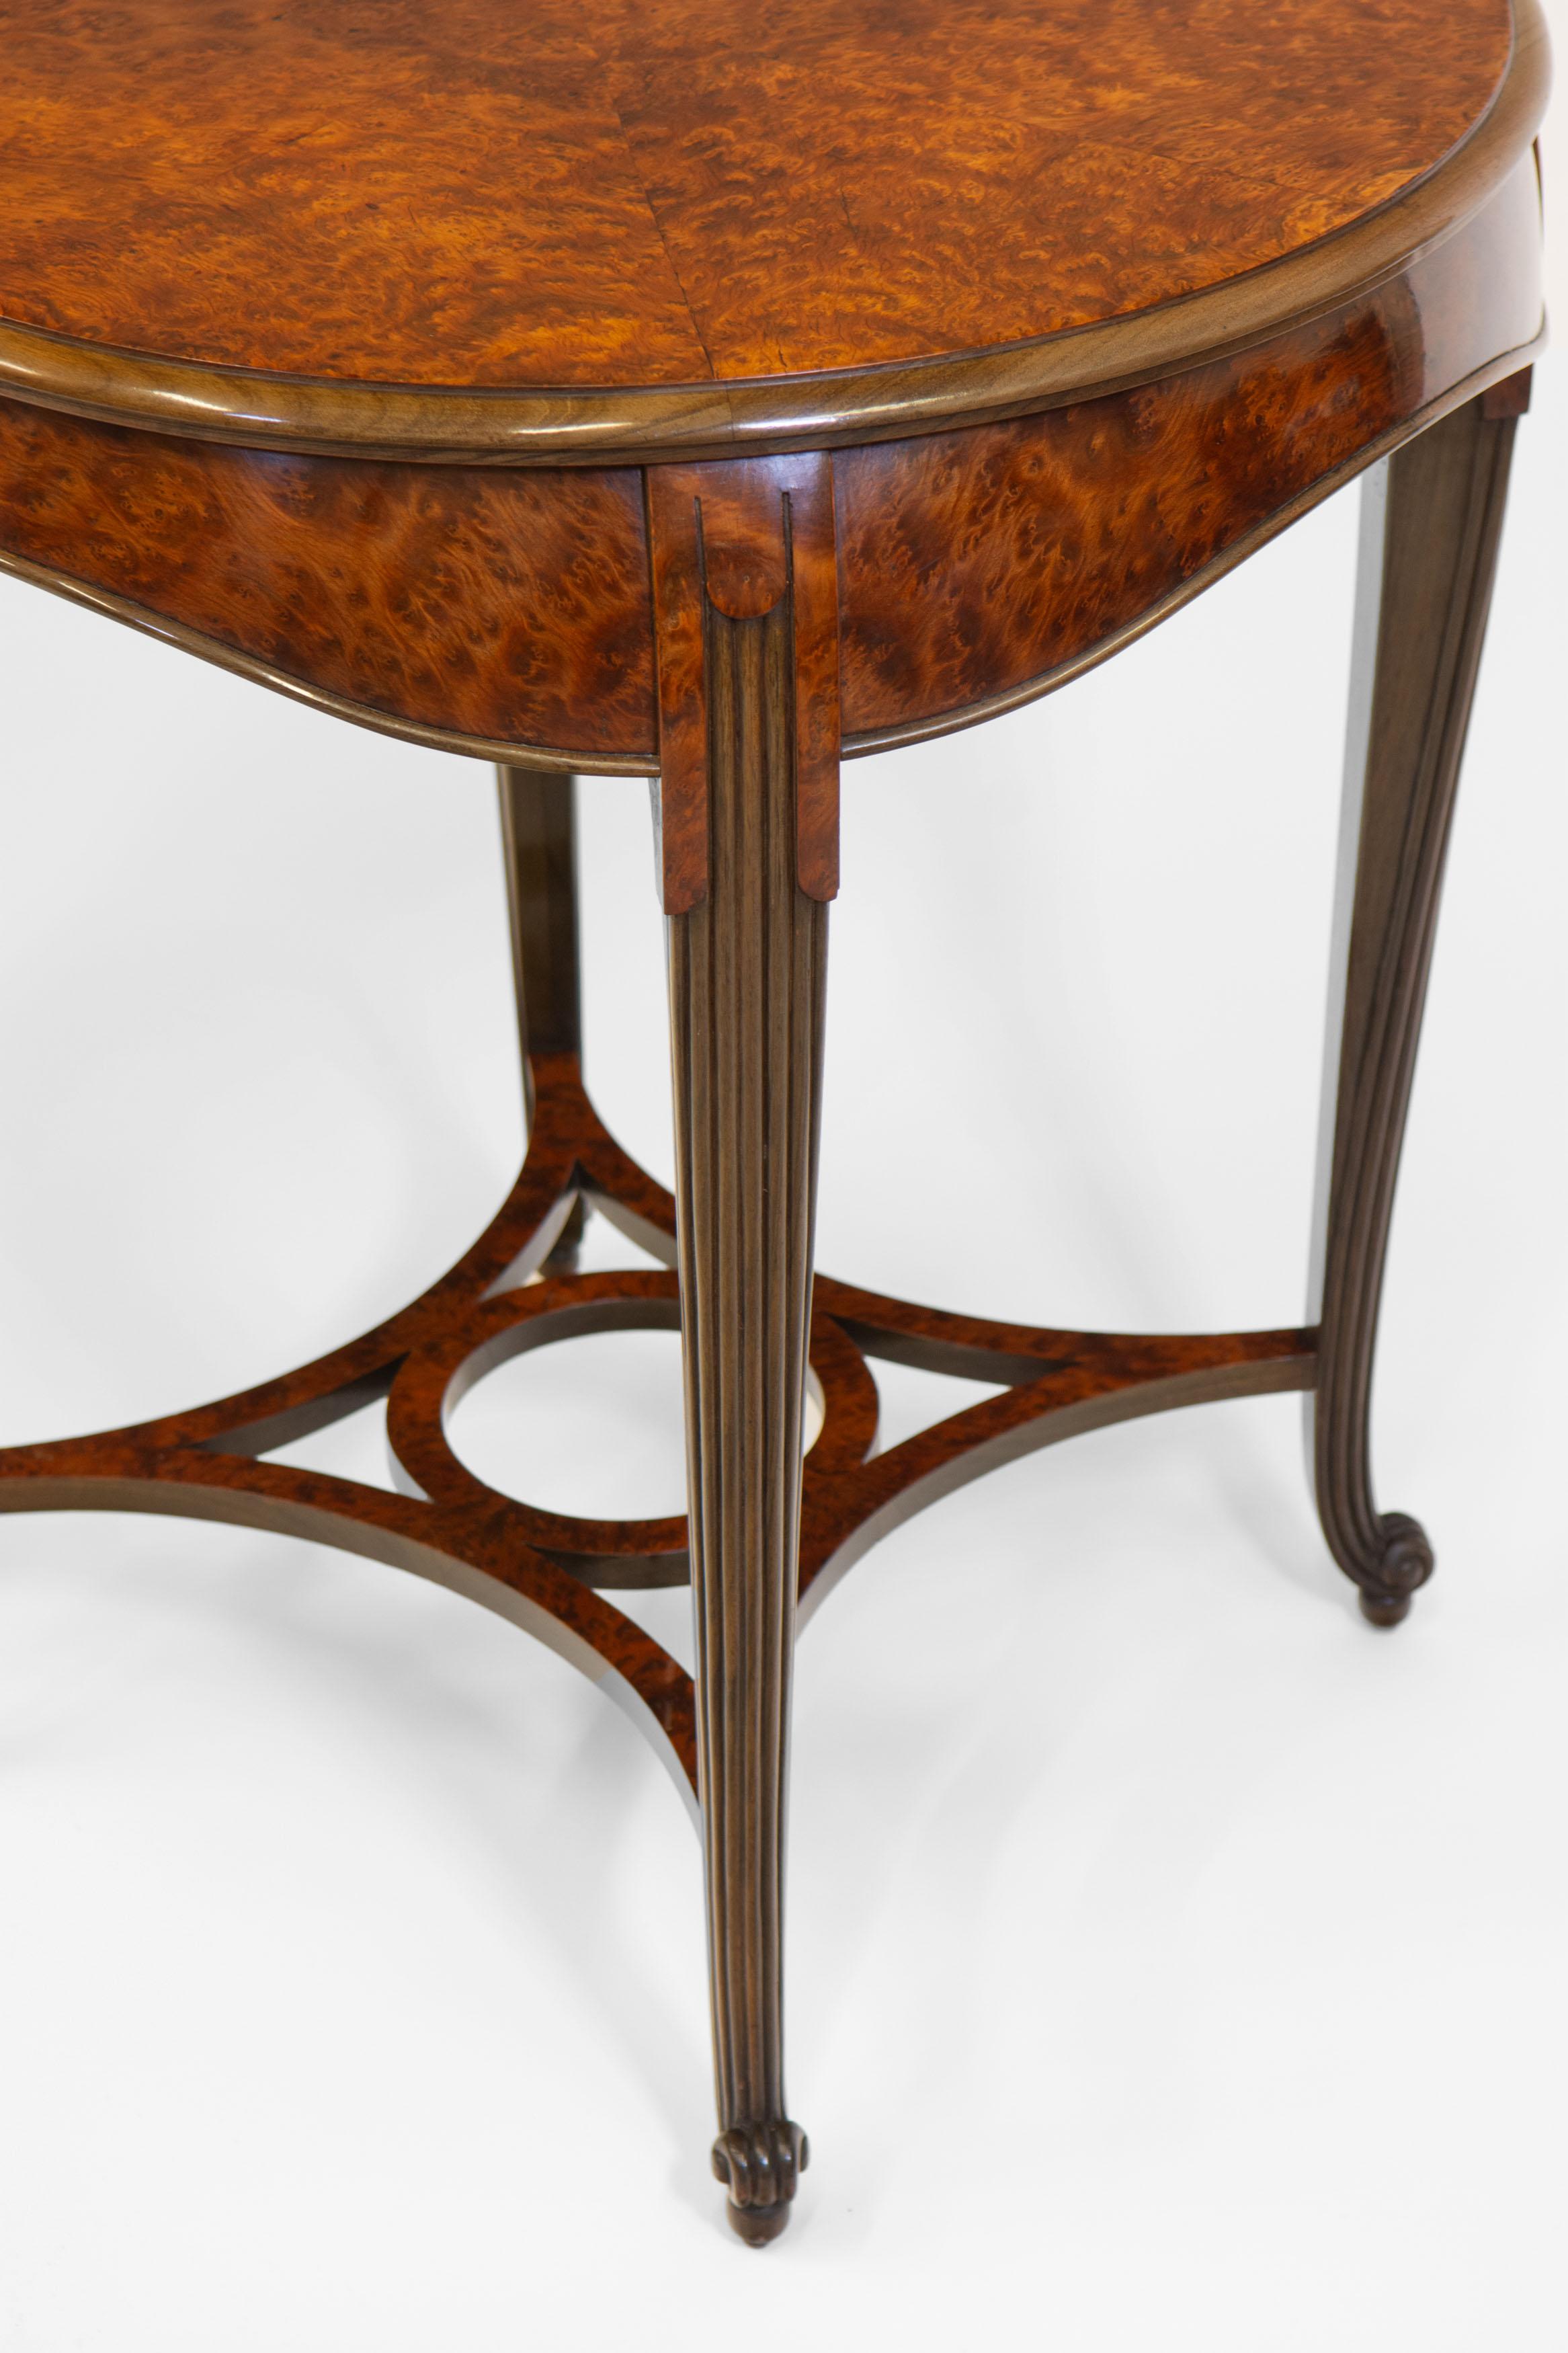  A superb French Art Deco amboyna occasional side table. Circa 1930.

This elegant table has a shaped cushion frieze, standing on walnut reeded legs. It terminates to an outswept scroll and ball foot, joined by a central stretcher of circular form.